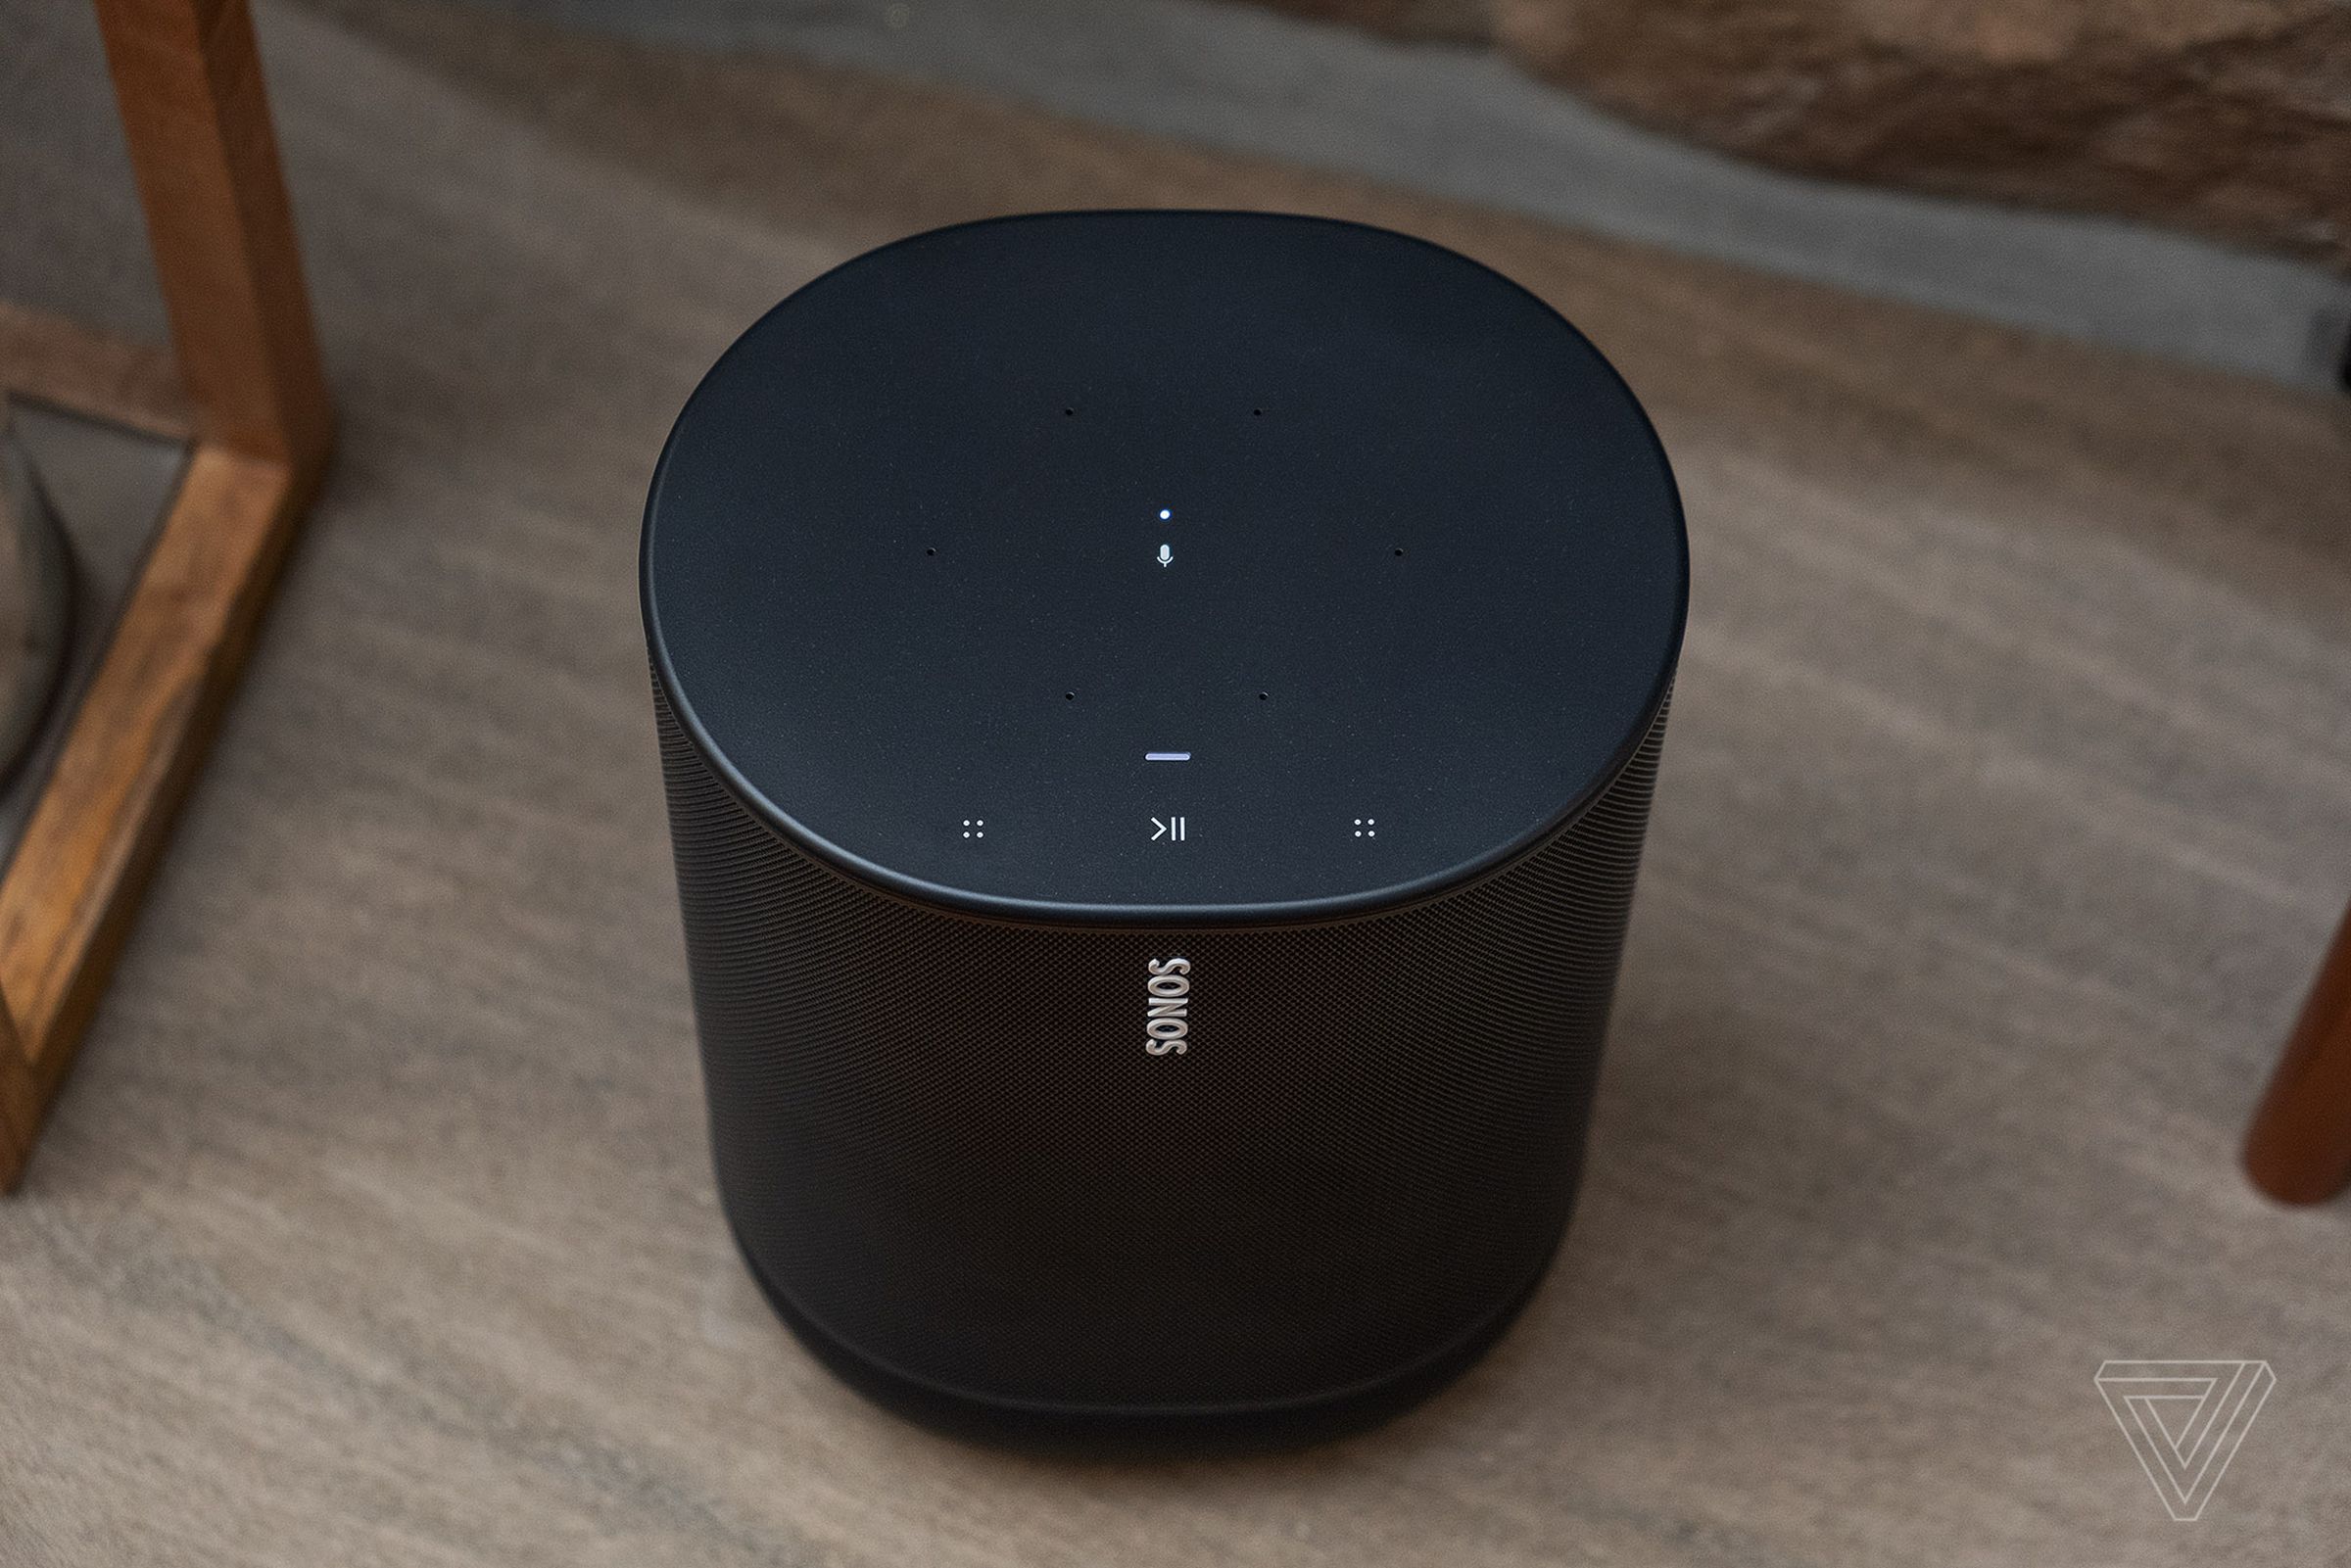 The Move has always-listening microphones so you can use it as a smart speaker.